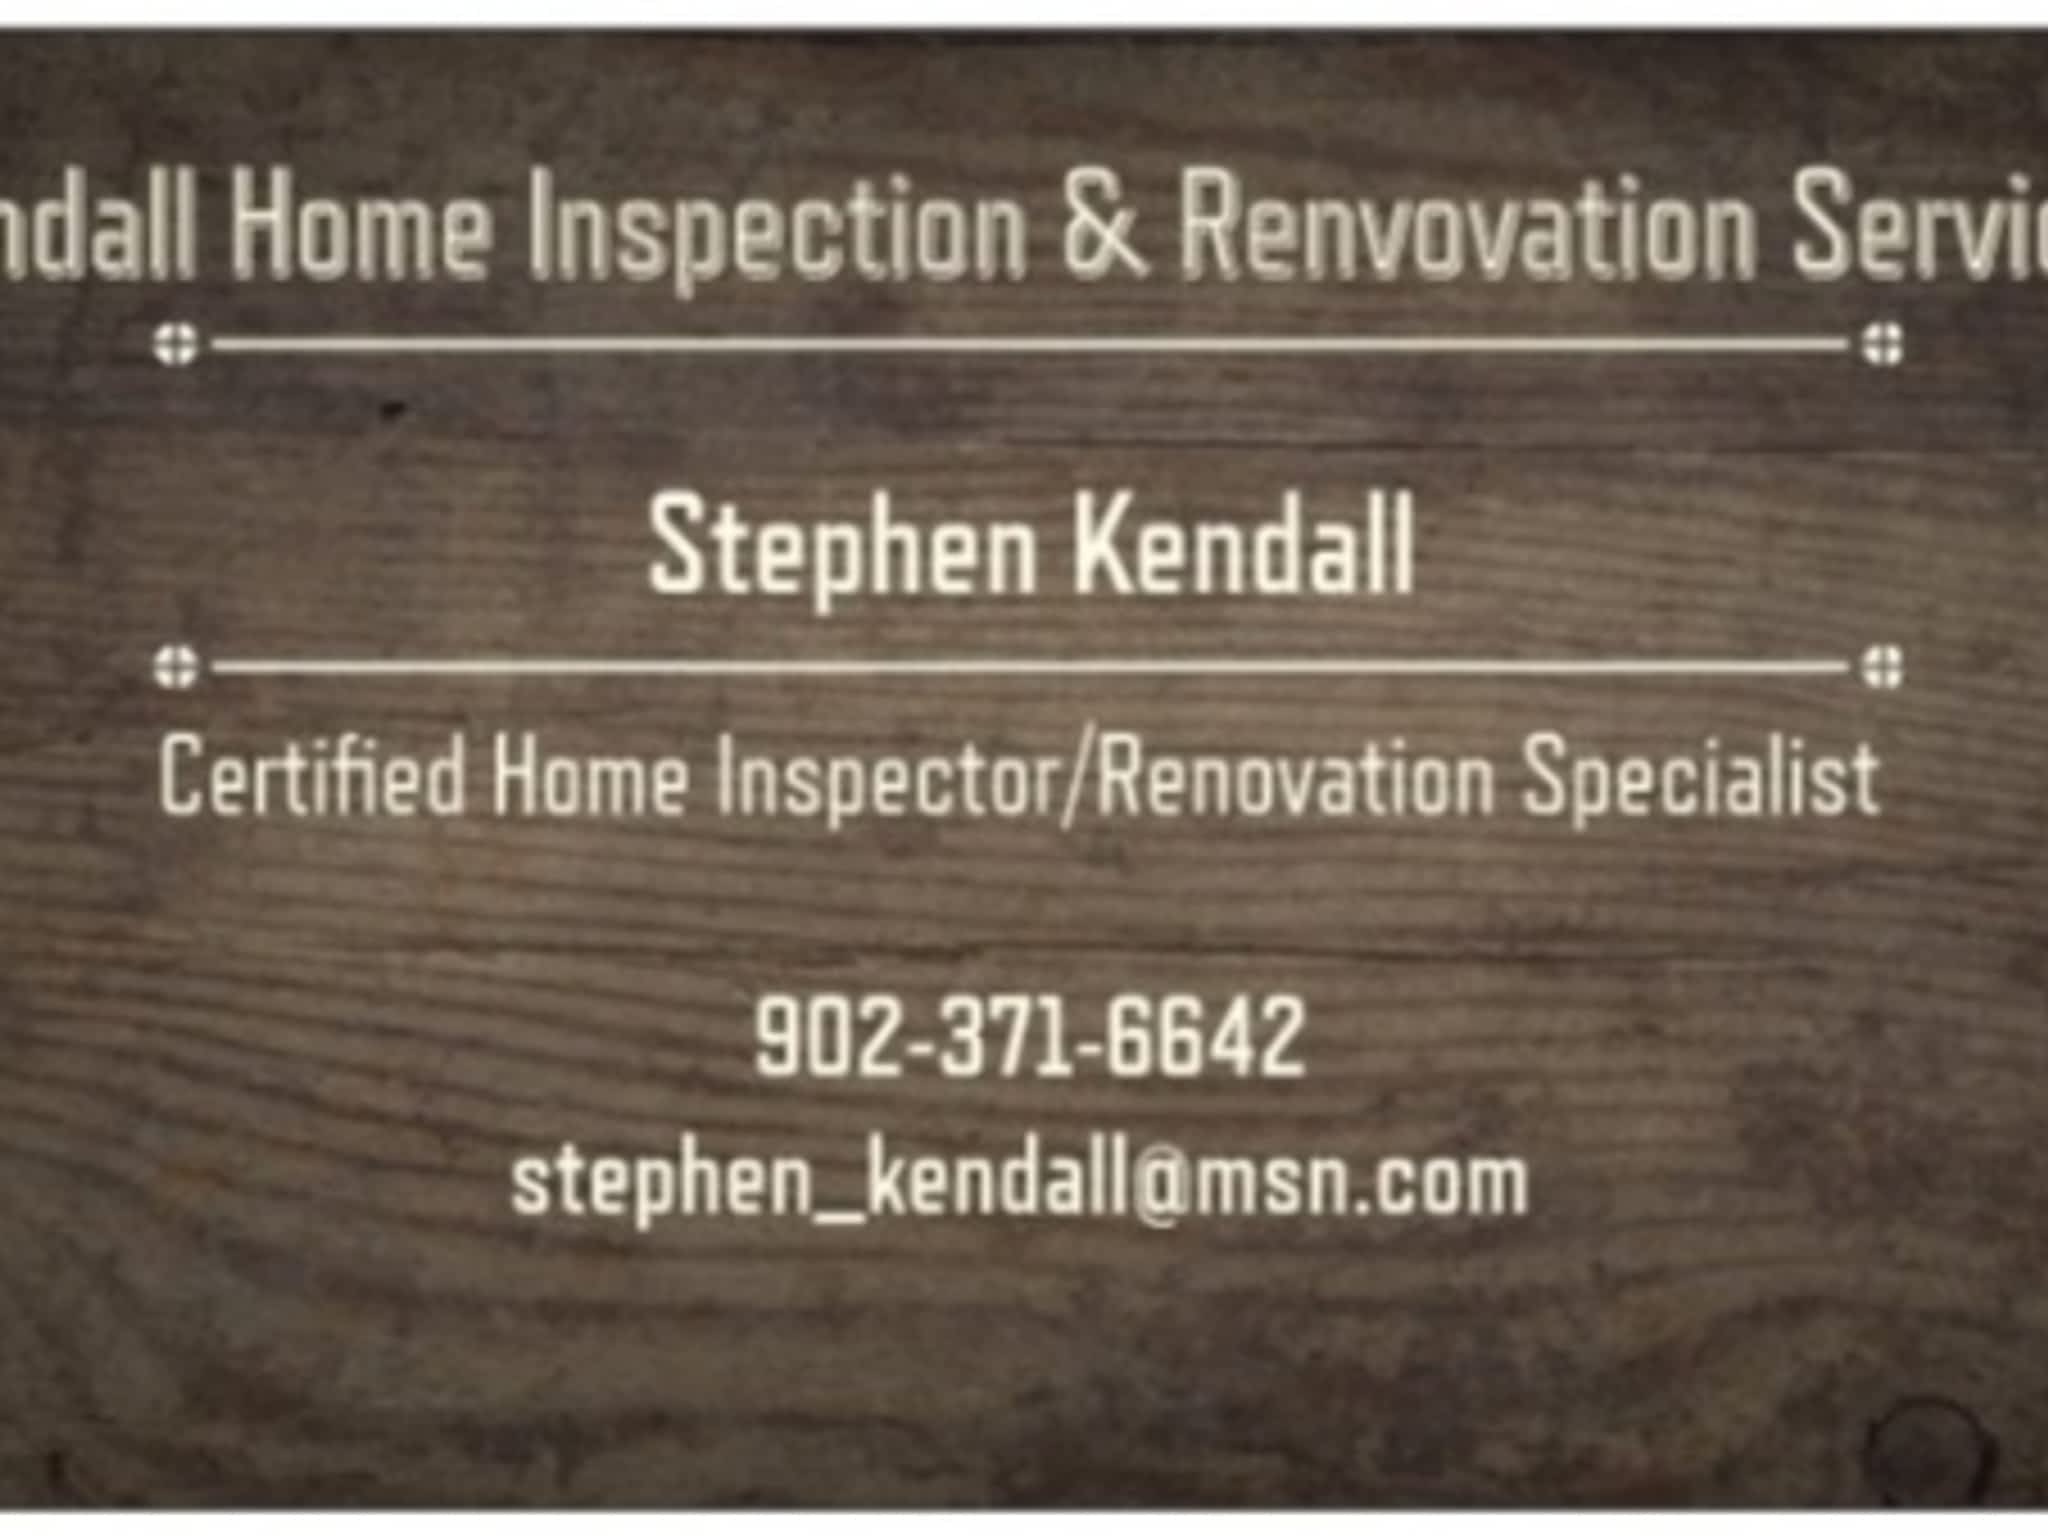 photo Kendall Home Inspection & Renovations Sevices